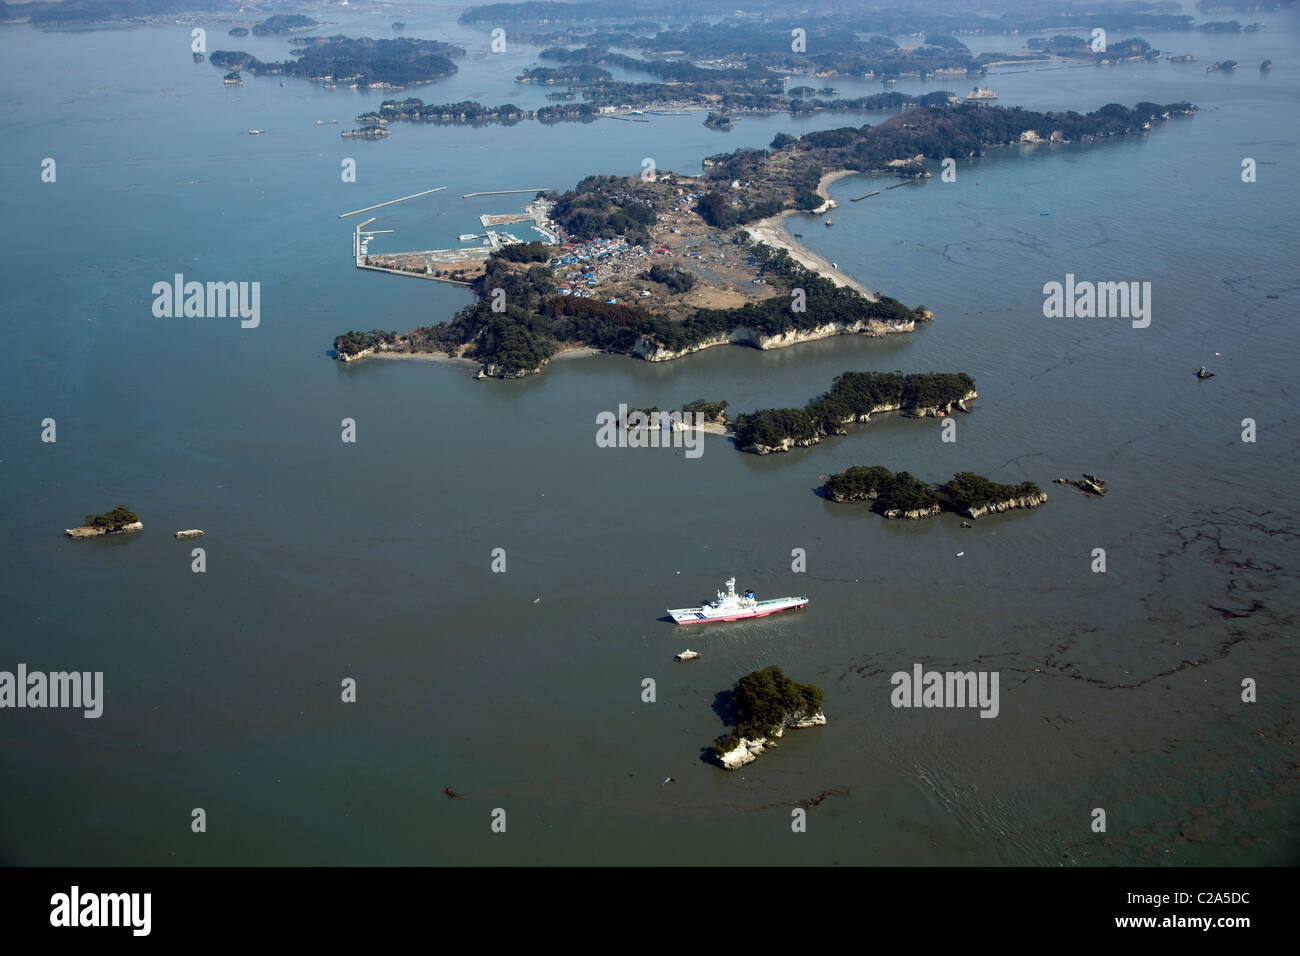 Aerial view of oil spilled Matsushima Bay and stranded ship in Shiogama, Miyagi Prefecture after a 9. 0 magnitude earthquake Stock Photo